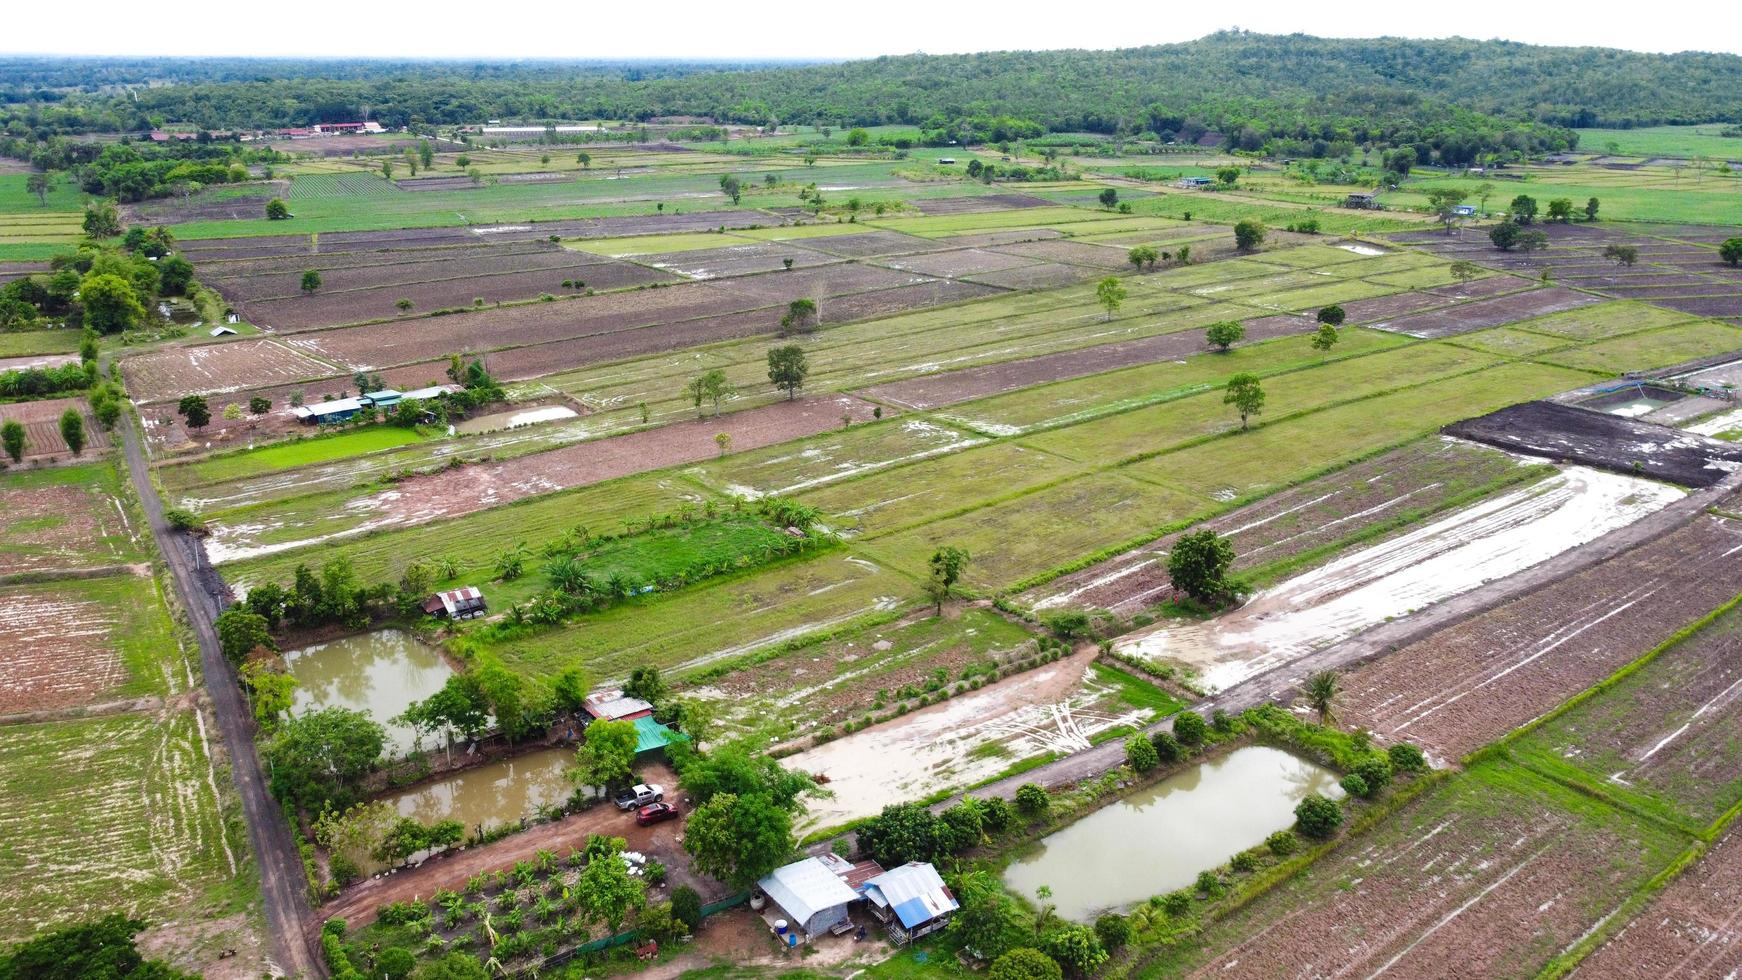 Aerial view of green fields and farmlands in rural Thailand photo